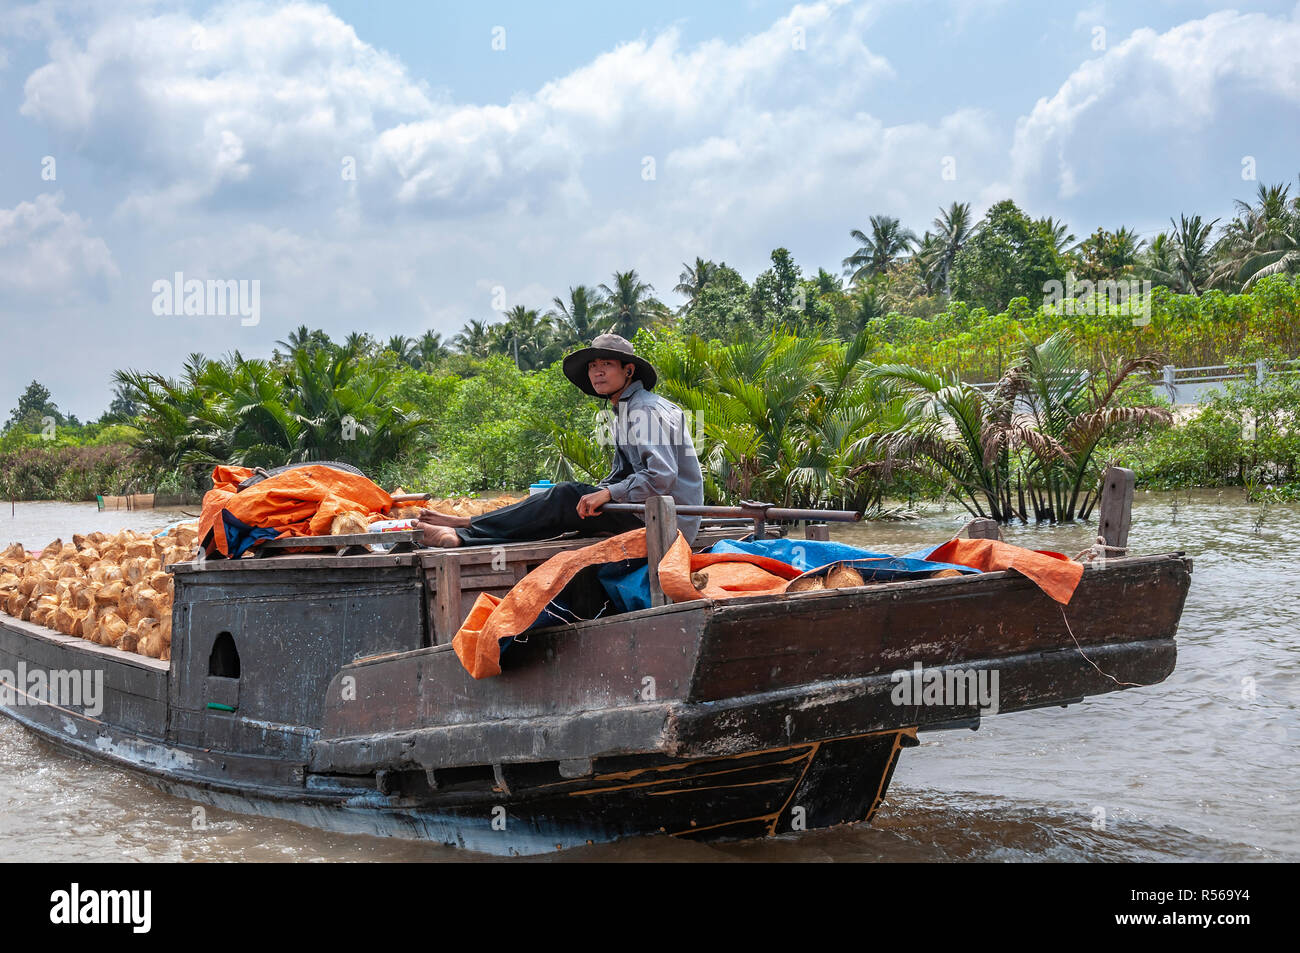 Vietnamese boatman steers his laden traditional wooden boat full of coconuts along the Cai Rang River, Can Tho Province, Mekong Delta, South Vietnam Stock Photo